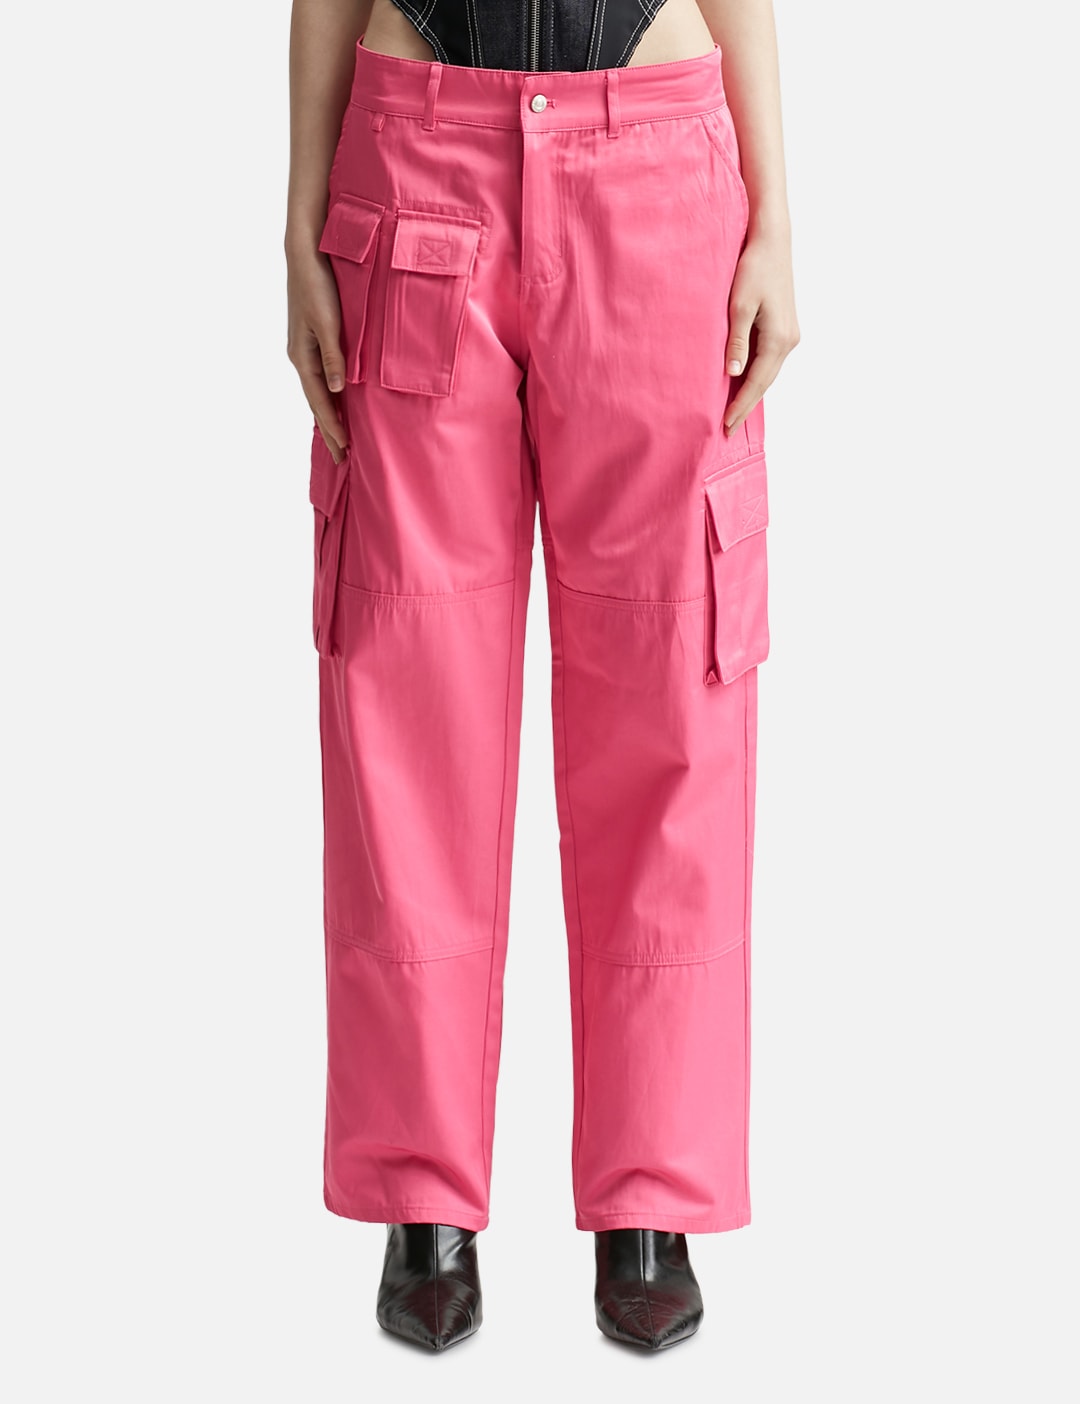 House of Sunny - Easy Rider Cargo Pants  HBX - Globally Curated Fashion  and Lifestyle by Hypebeast